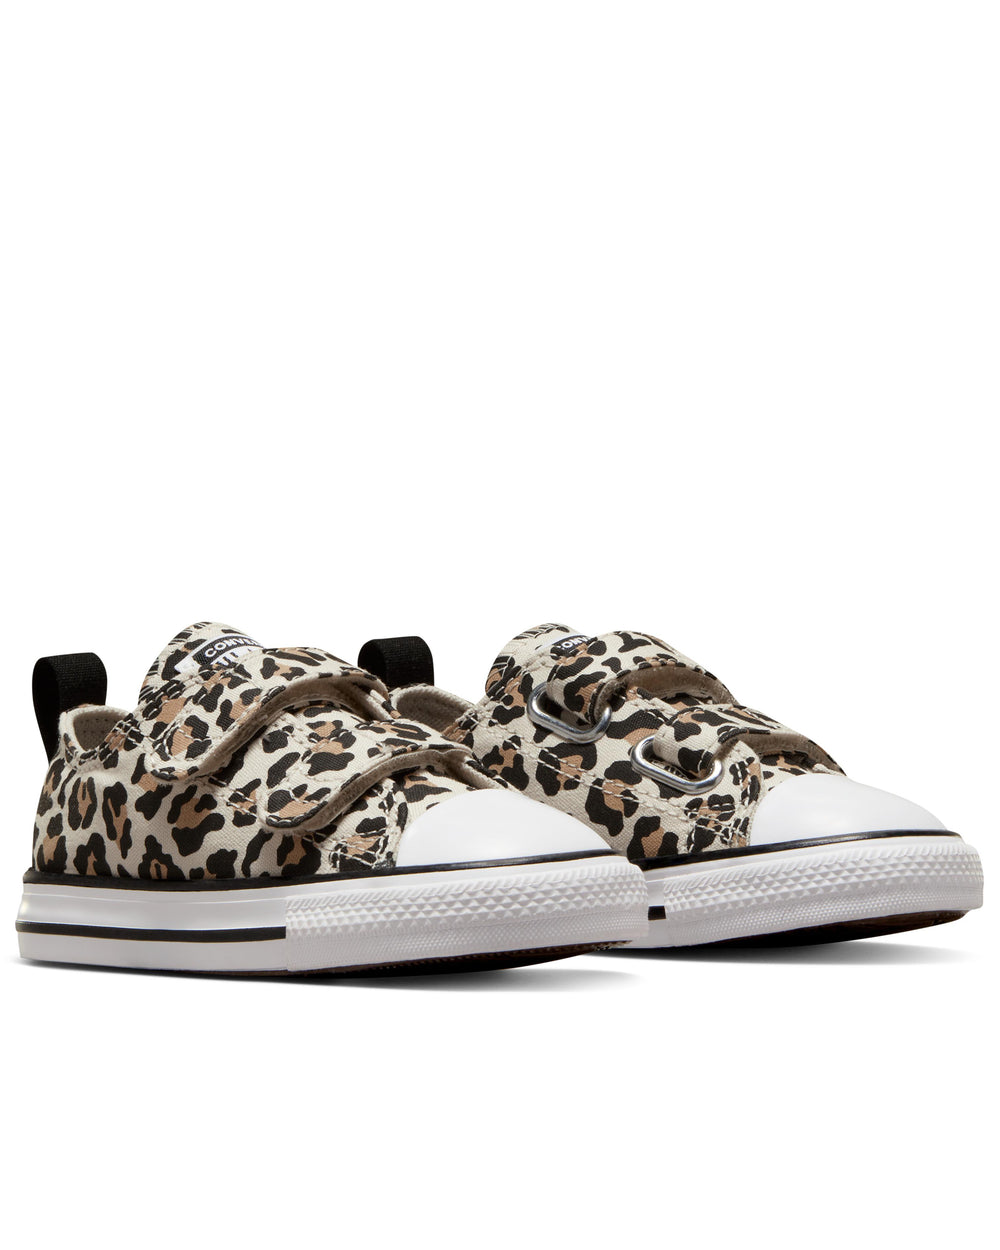 Converse Chuck Taylor All Star Leopard Love 2V Toddler Low Top - Driftwood/Black/White